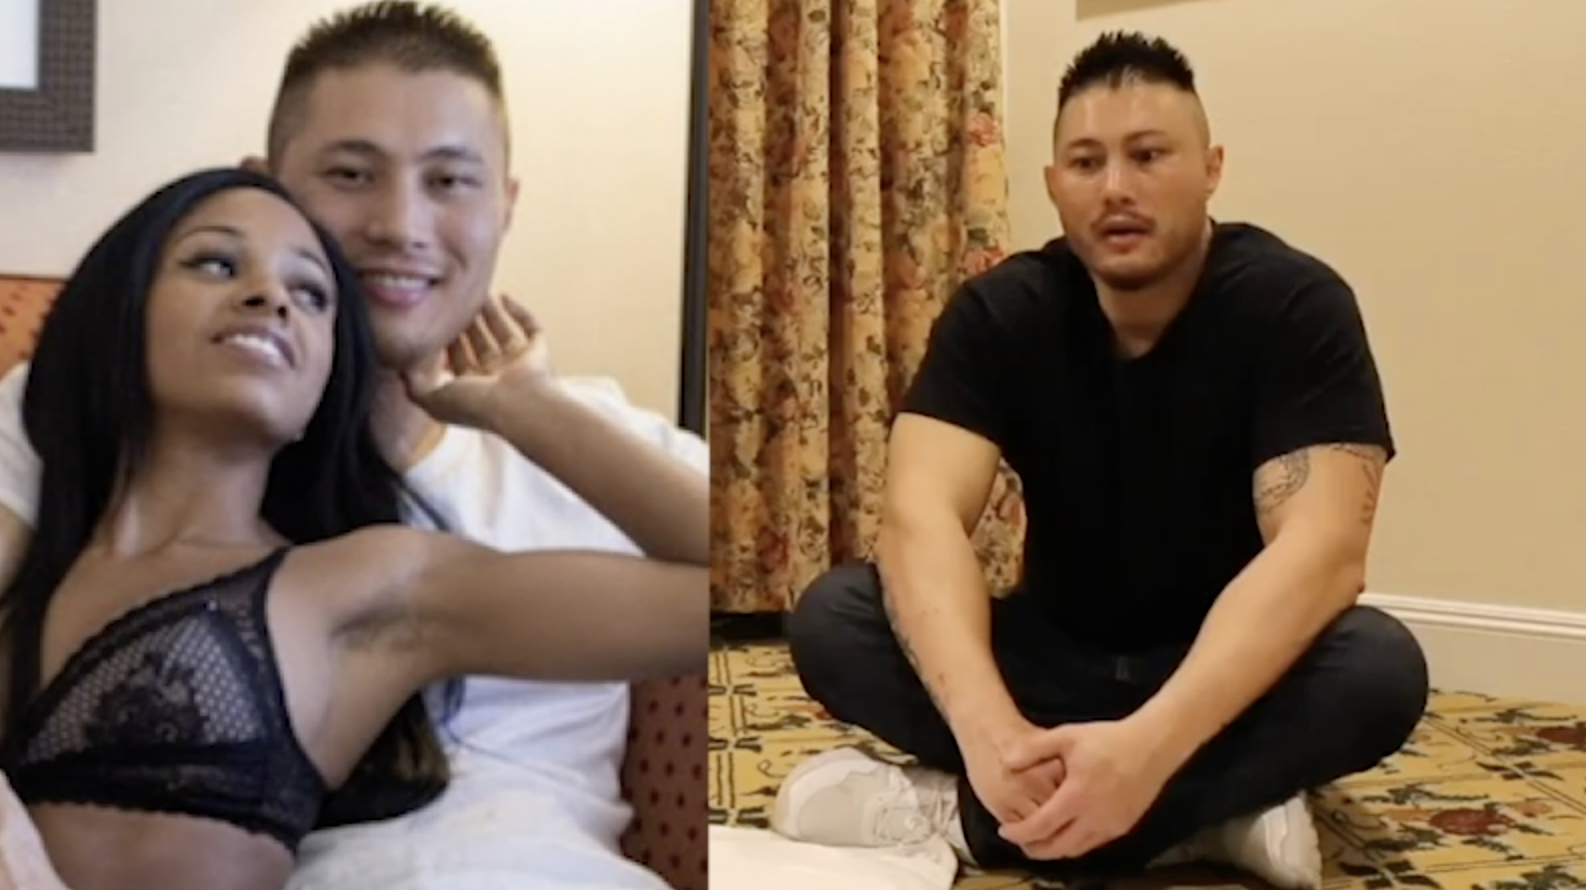 How Long Porn - EXCLUSIVE: Pâ€Œoâ€Œrn Star Jeremy Long Pens Last Statement After Cutting Finger  Off and Retiring 'Forever'